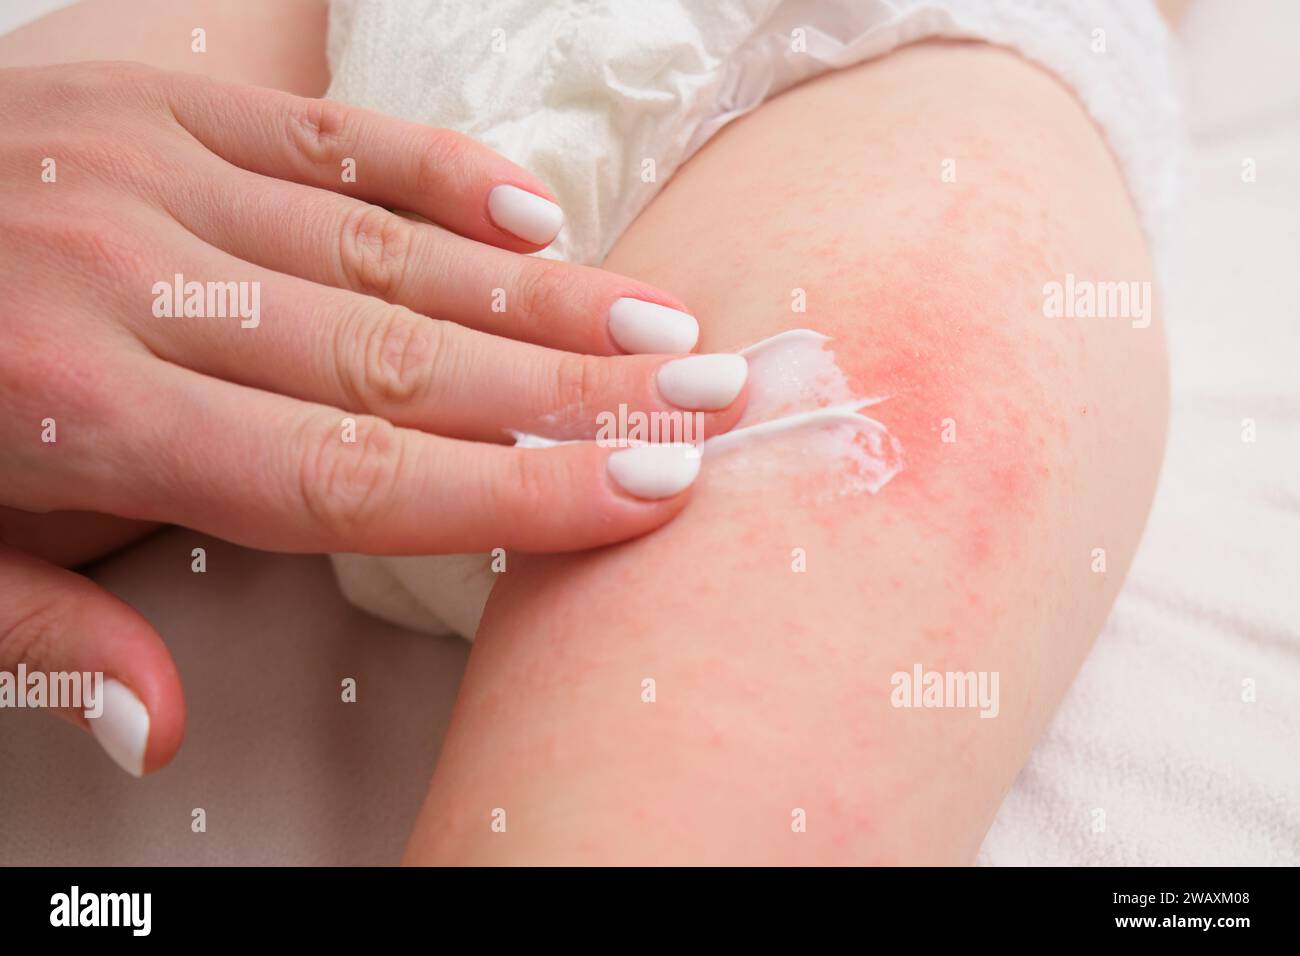 The mother is treating her child's pimple allergy with a cream. The woman is gently applying cream on the irritated skin of her baby's leg. Stock Photo